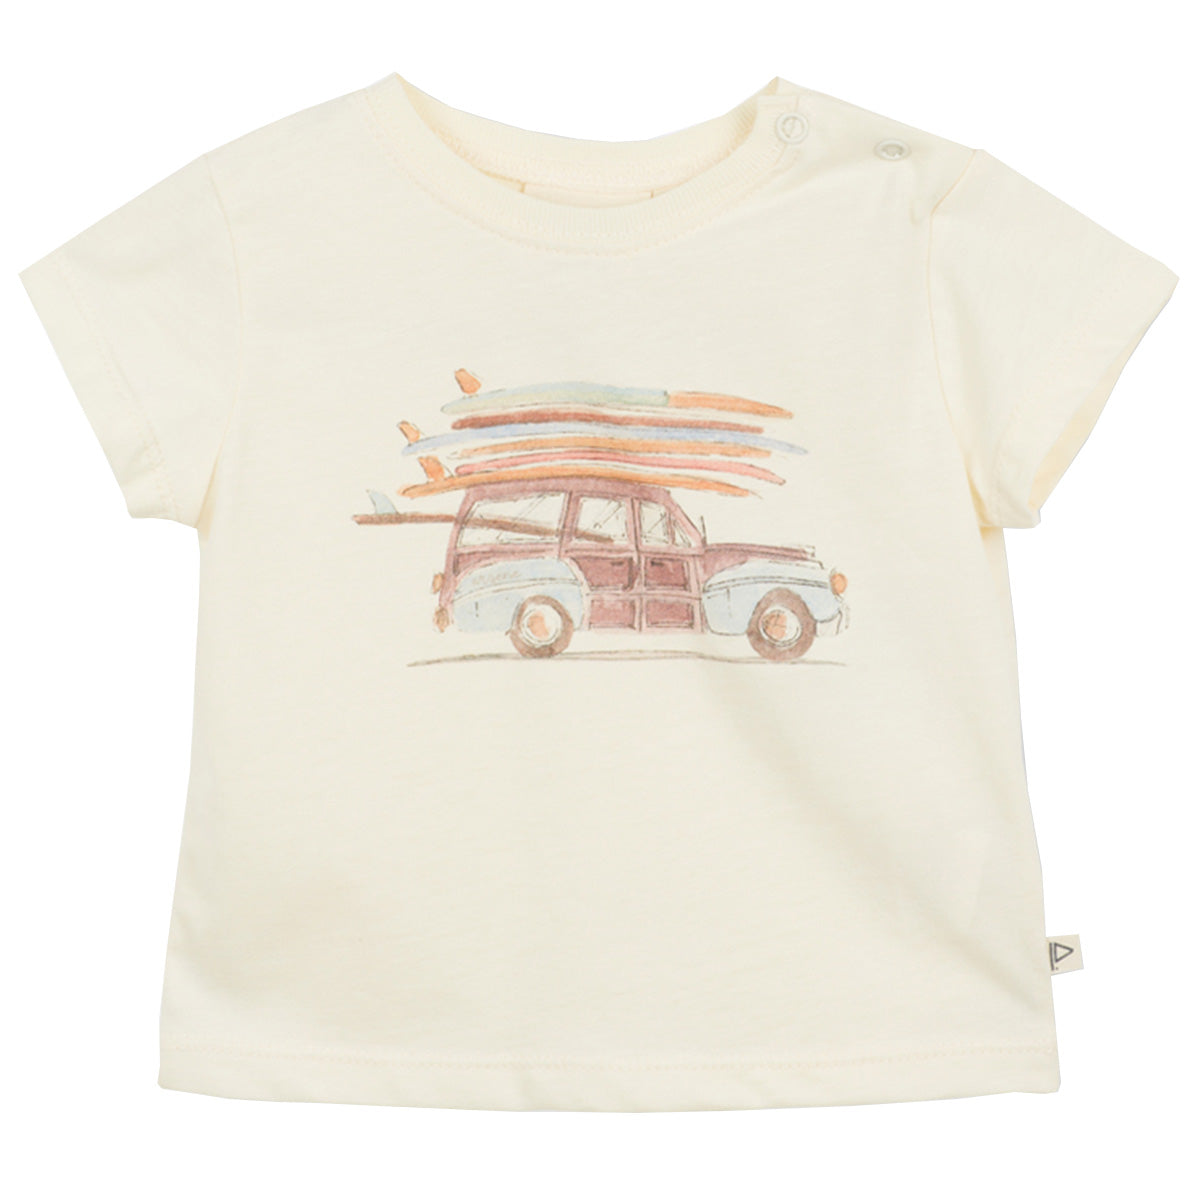 The Surf Car Baby Tee from Arsene et Les Pipelettes. Emerged organic cotton jersey for more sweetness